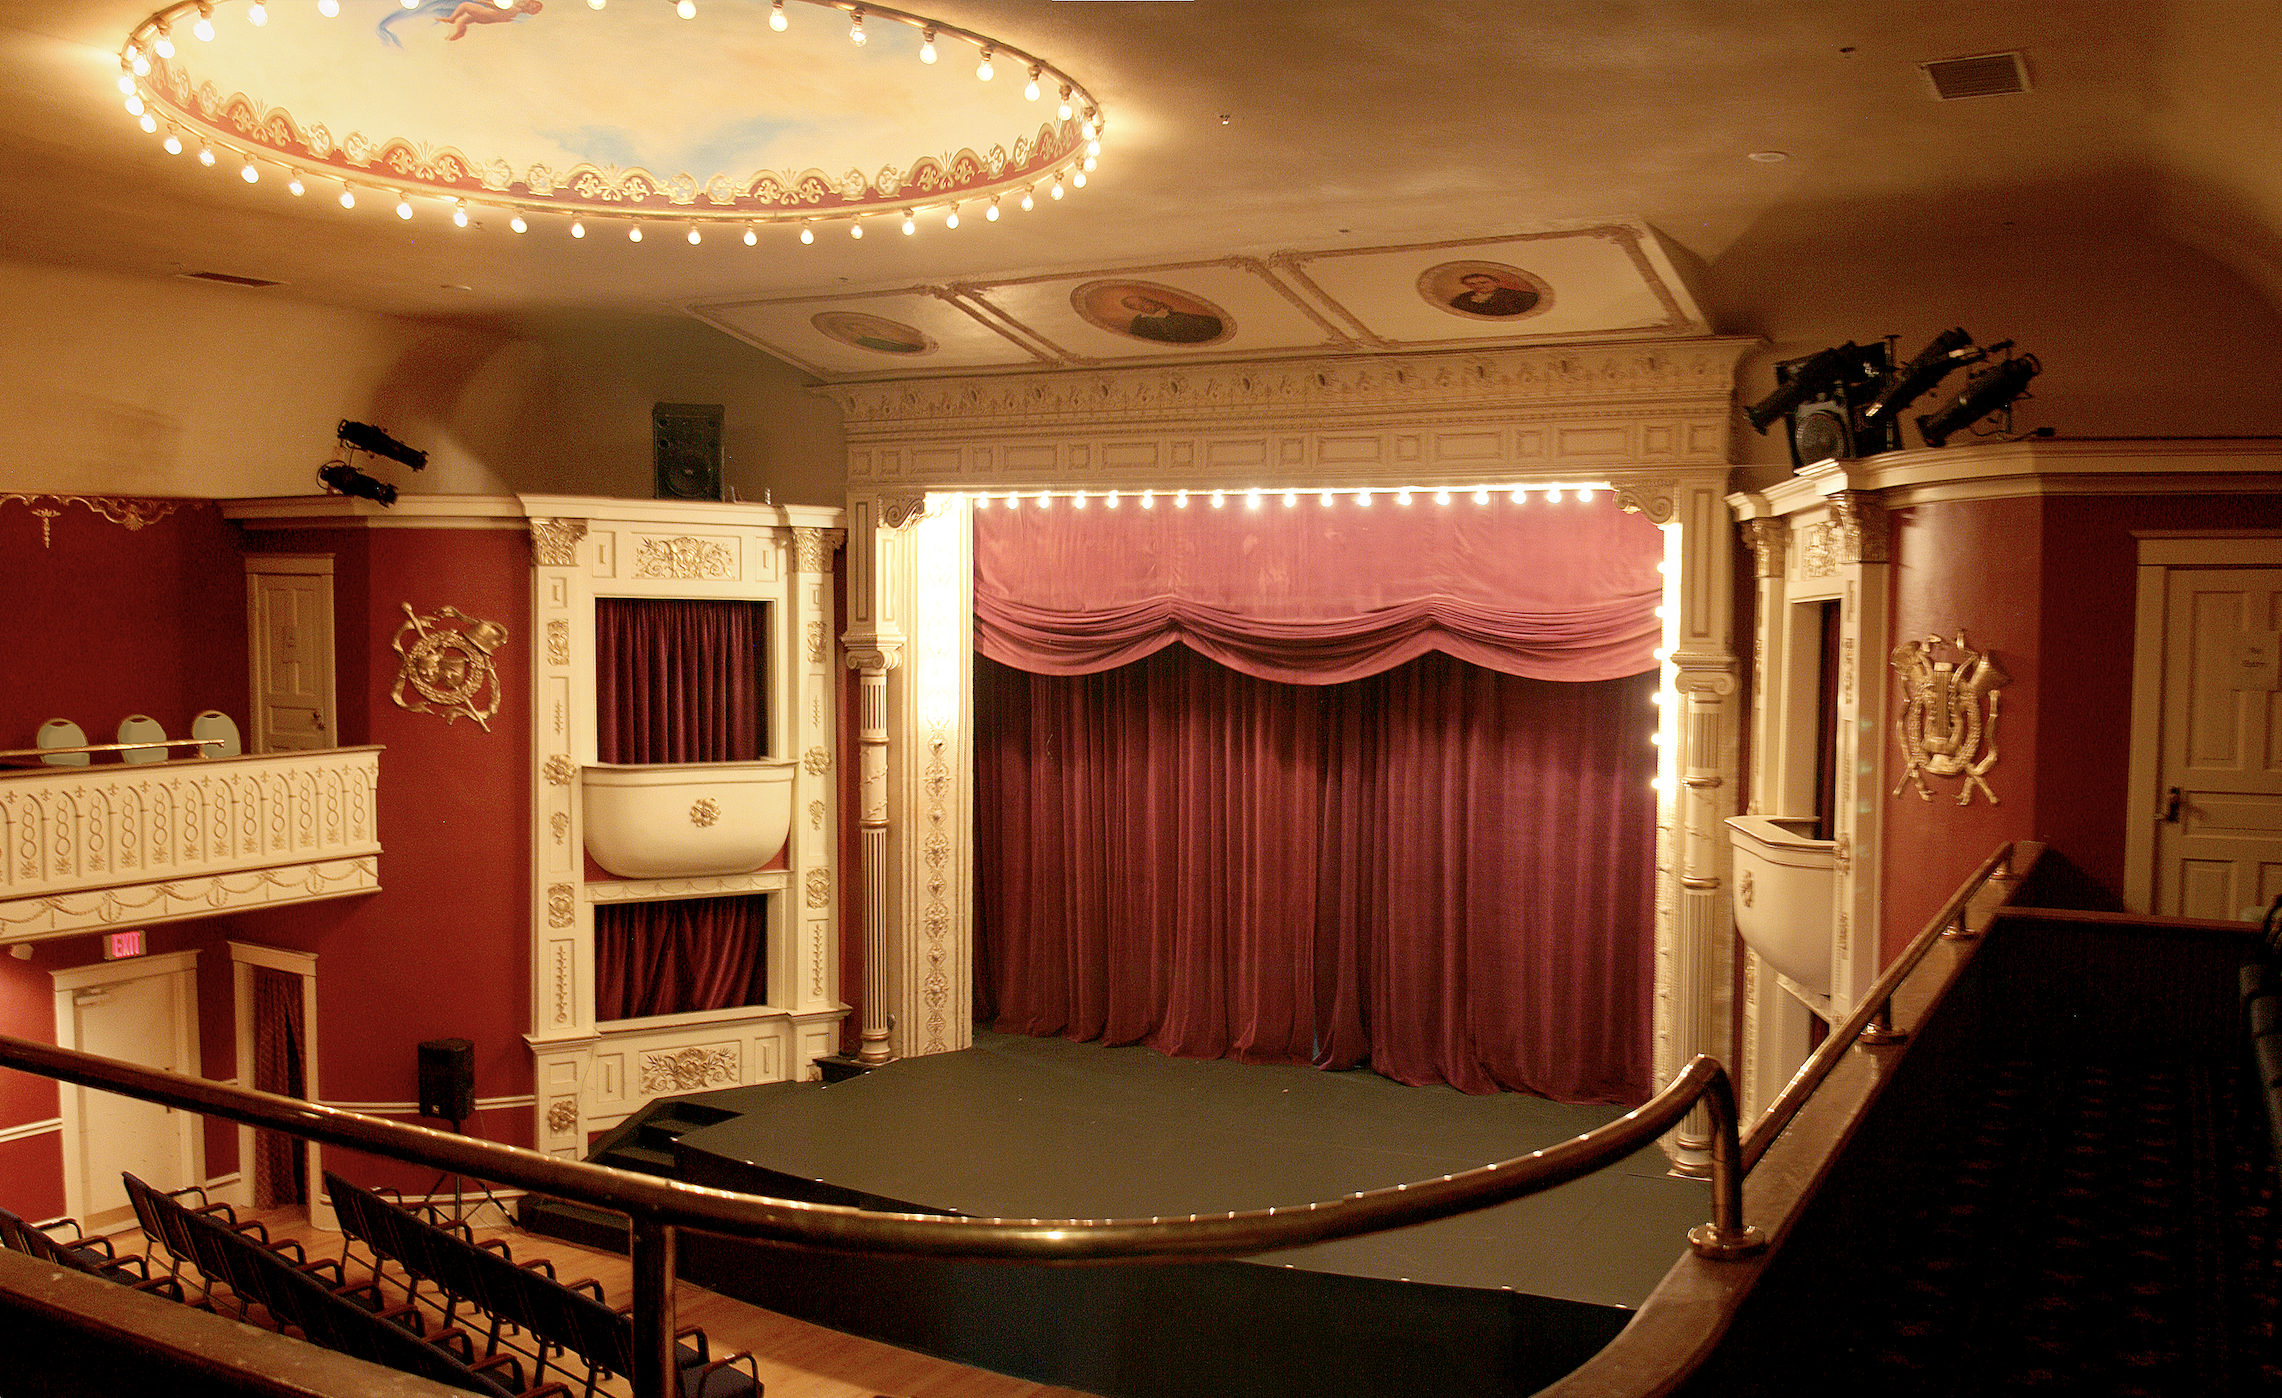 View of the stage from the top balcony in an opera house.